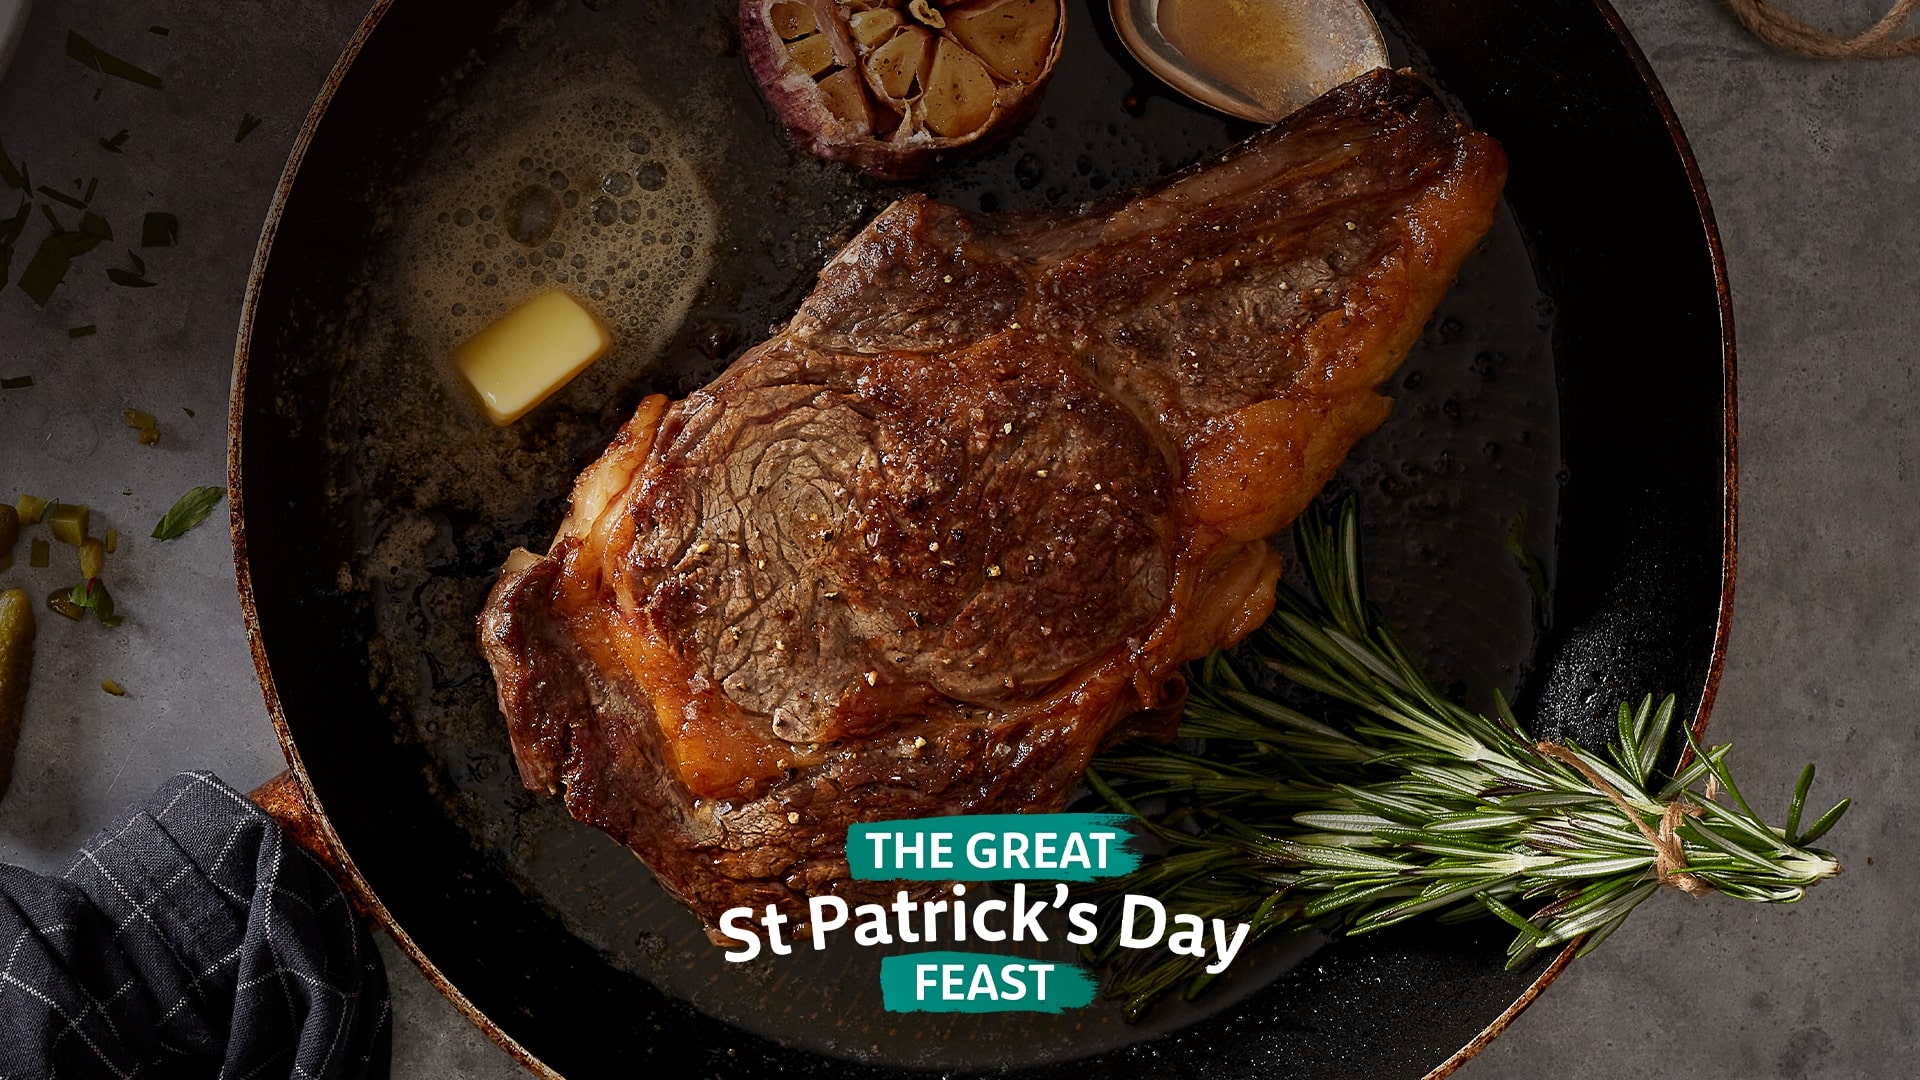 The Great St Patrick's Day Feast.